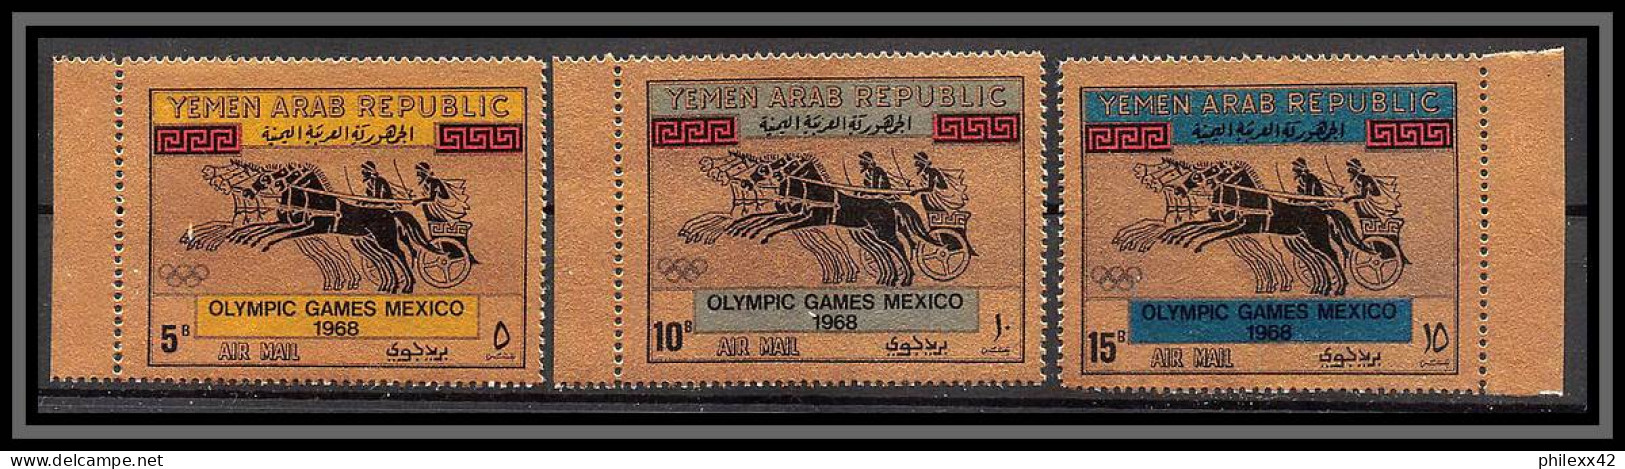 Nord Yemen YAR - 4402/ N°742/744 Jeux Olympiques (olympic Games) Mexico 1968 OR Gold Stamps Neuf ** MNH - Yémen